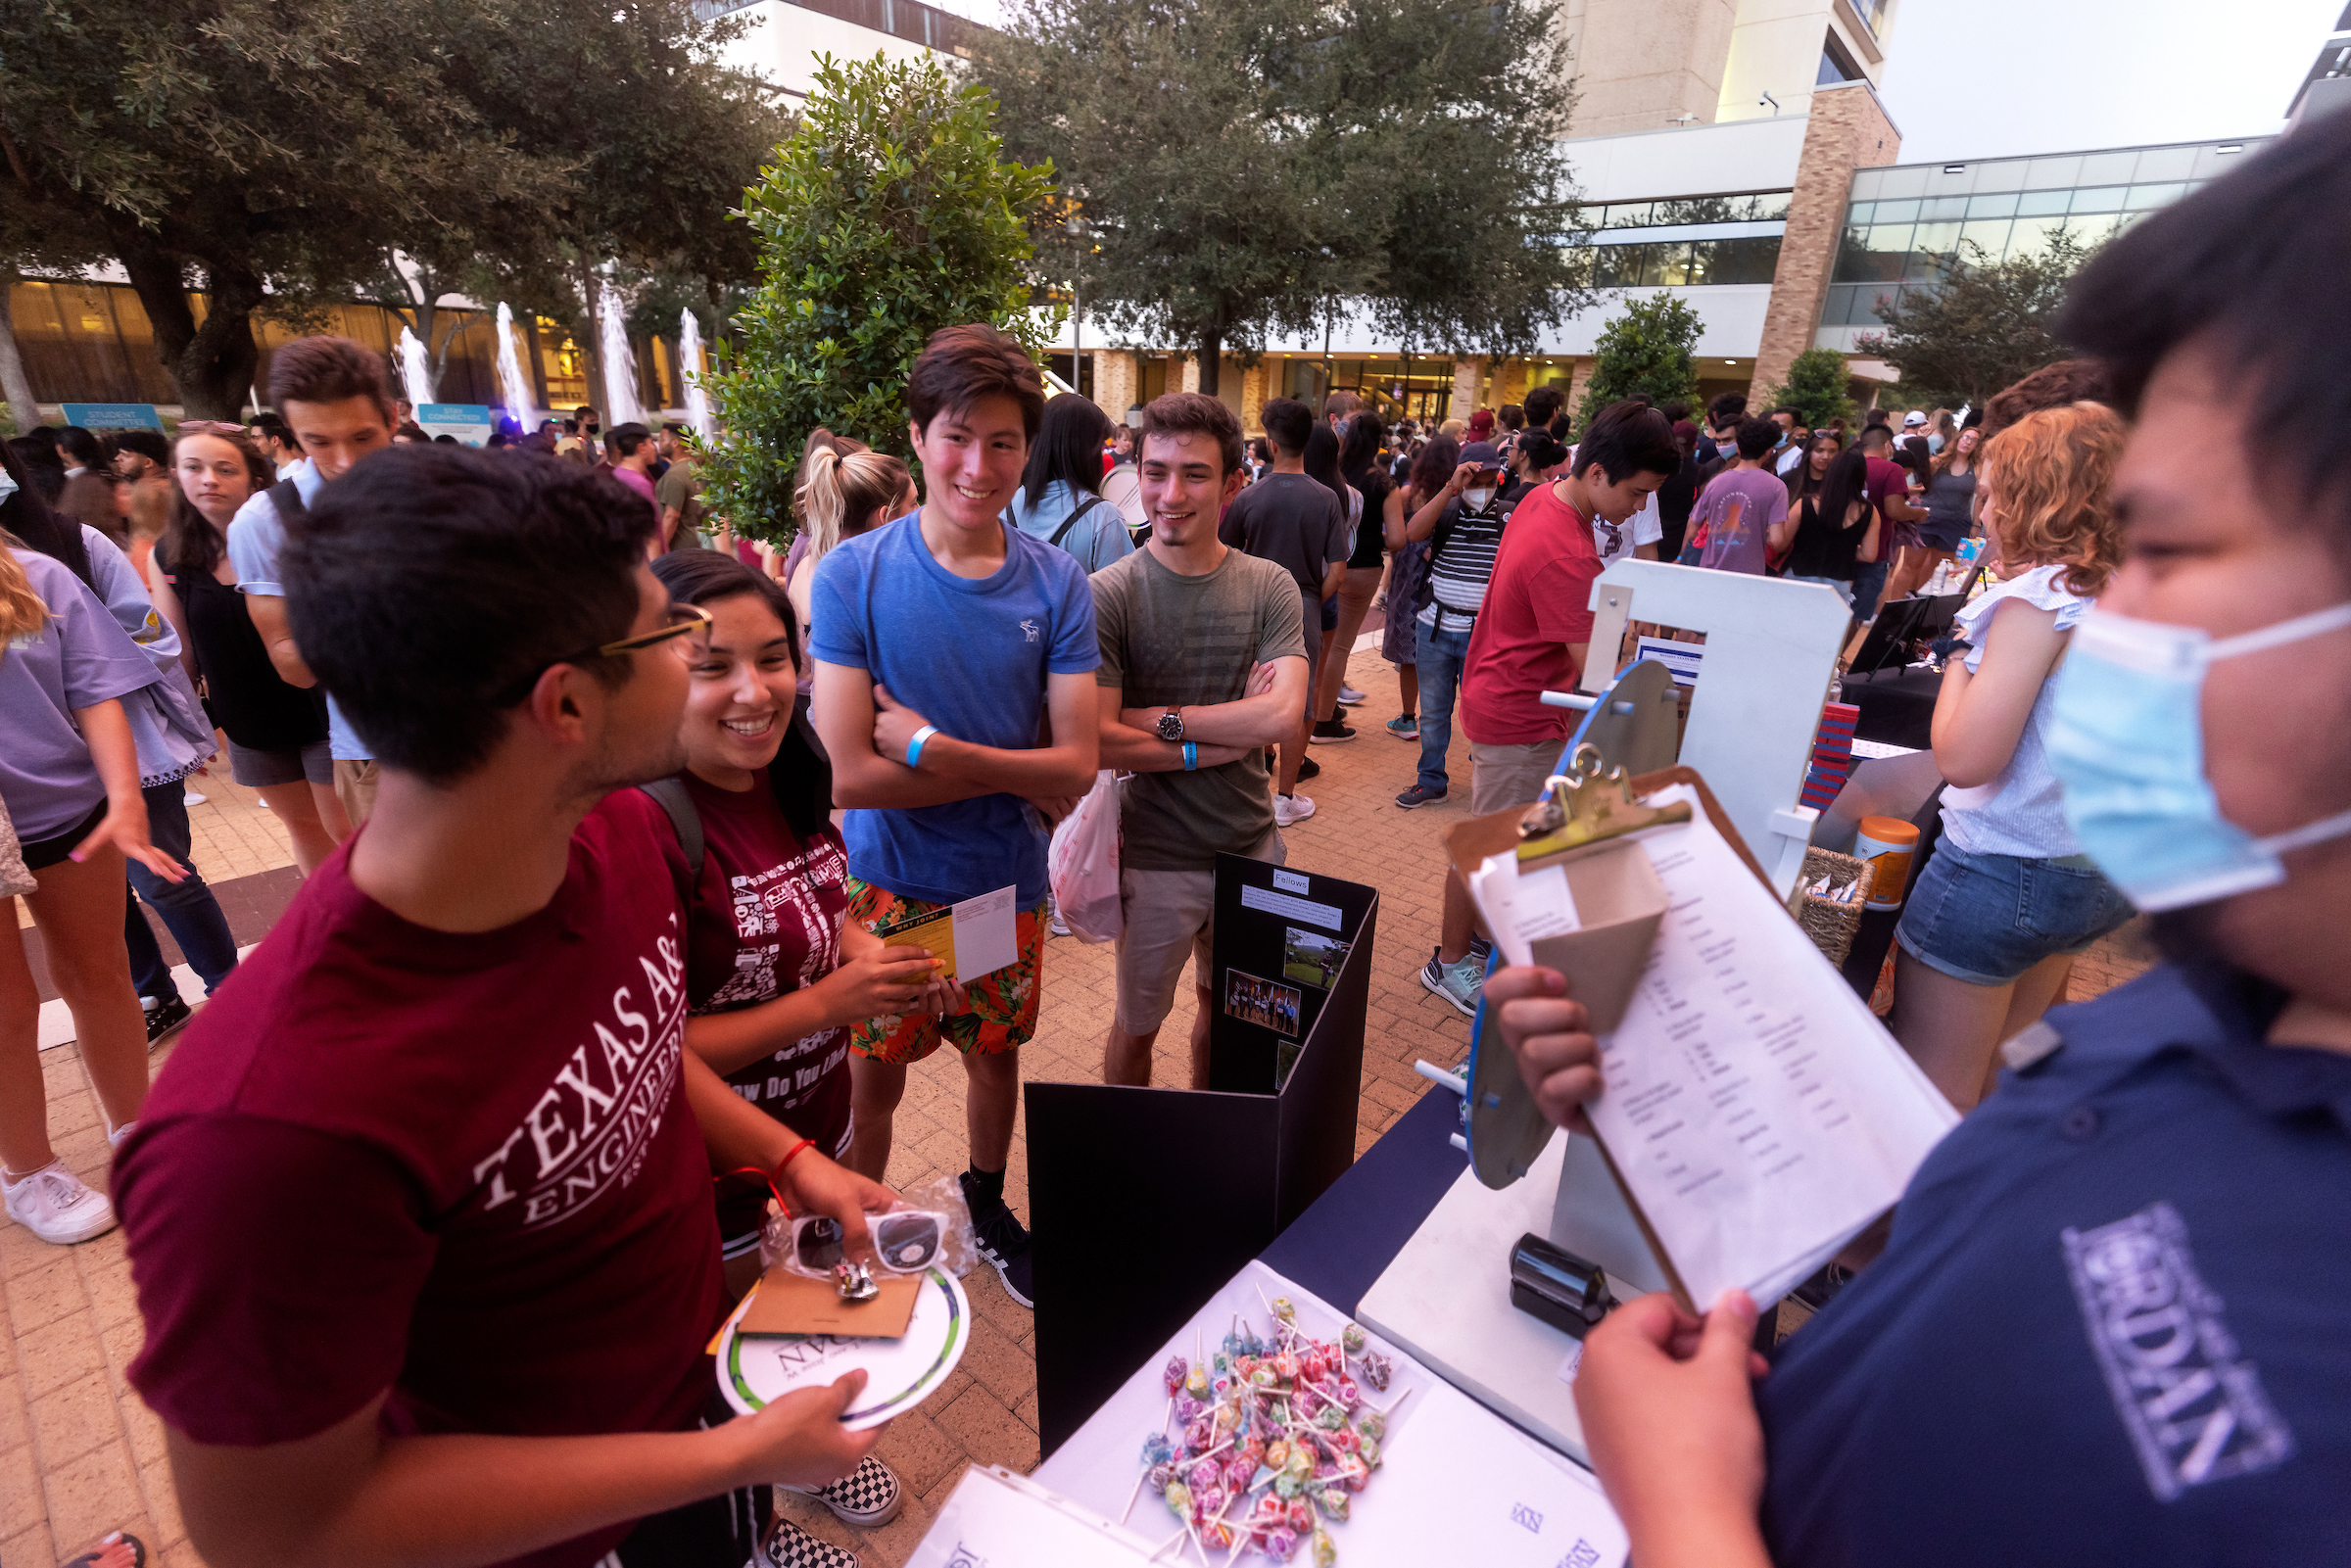 Large crowd of students enjoying an even during Howdy Week on the Texas A&M campus